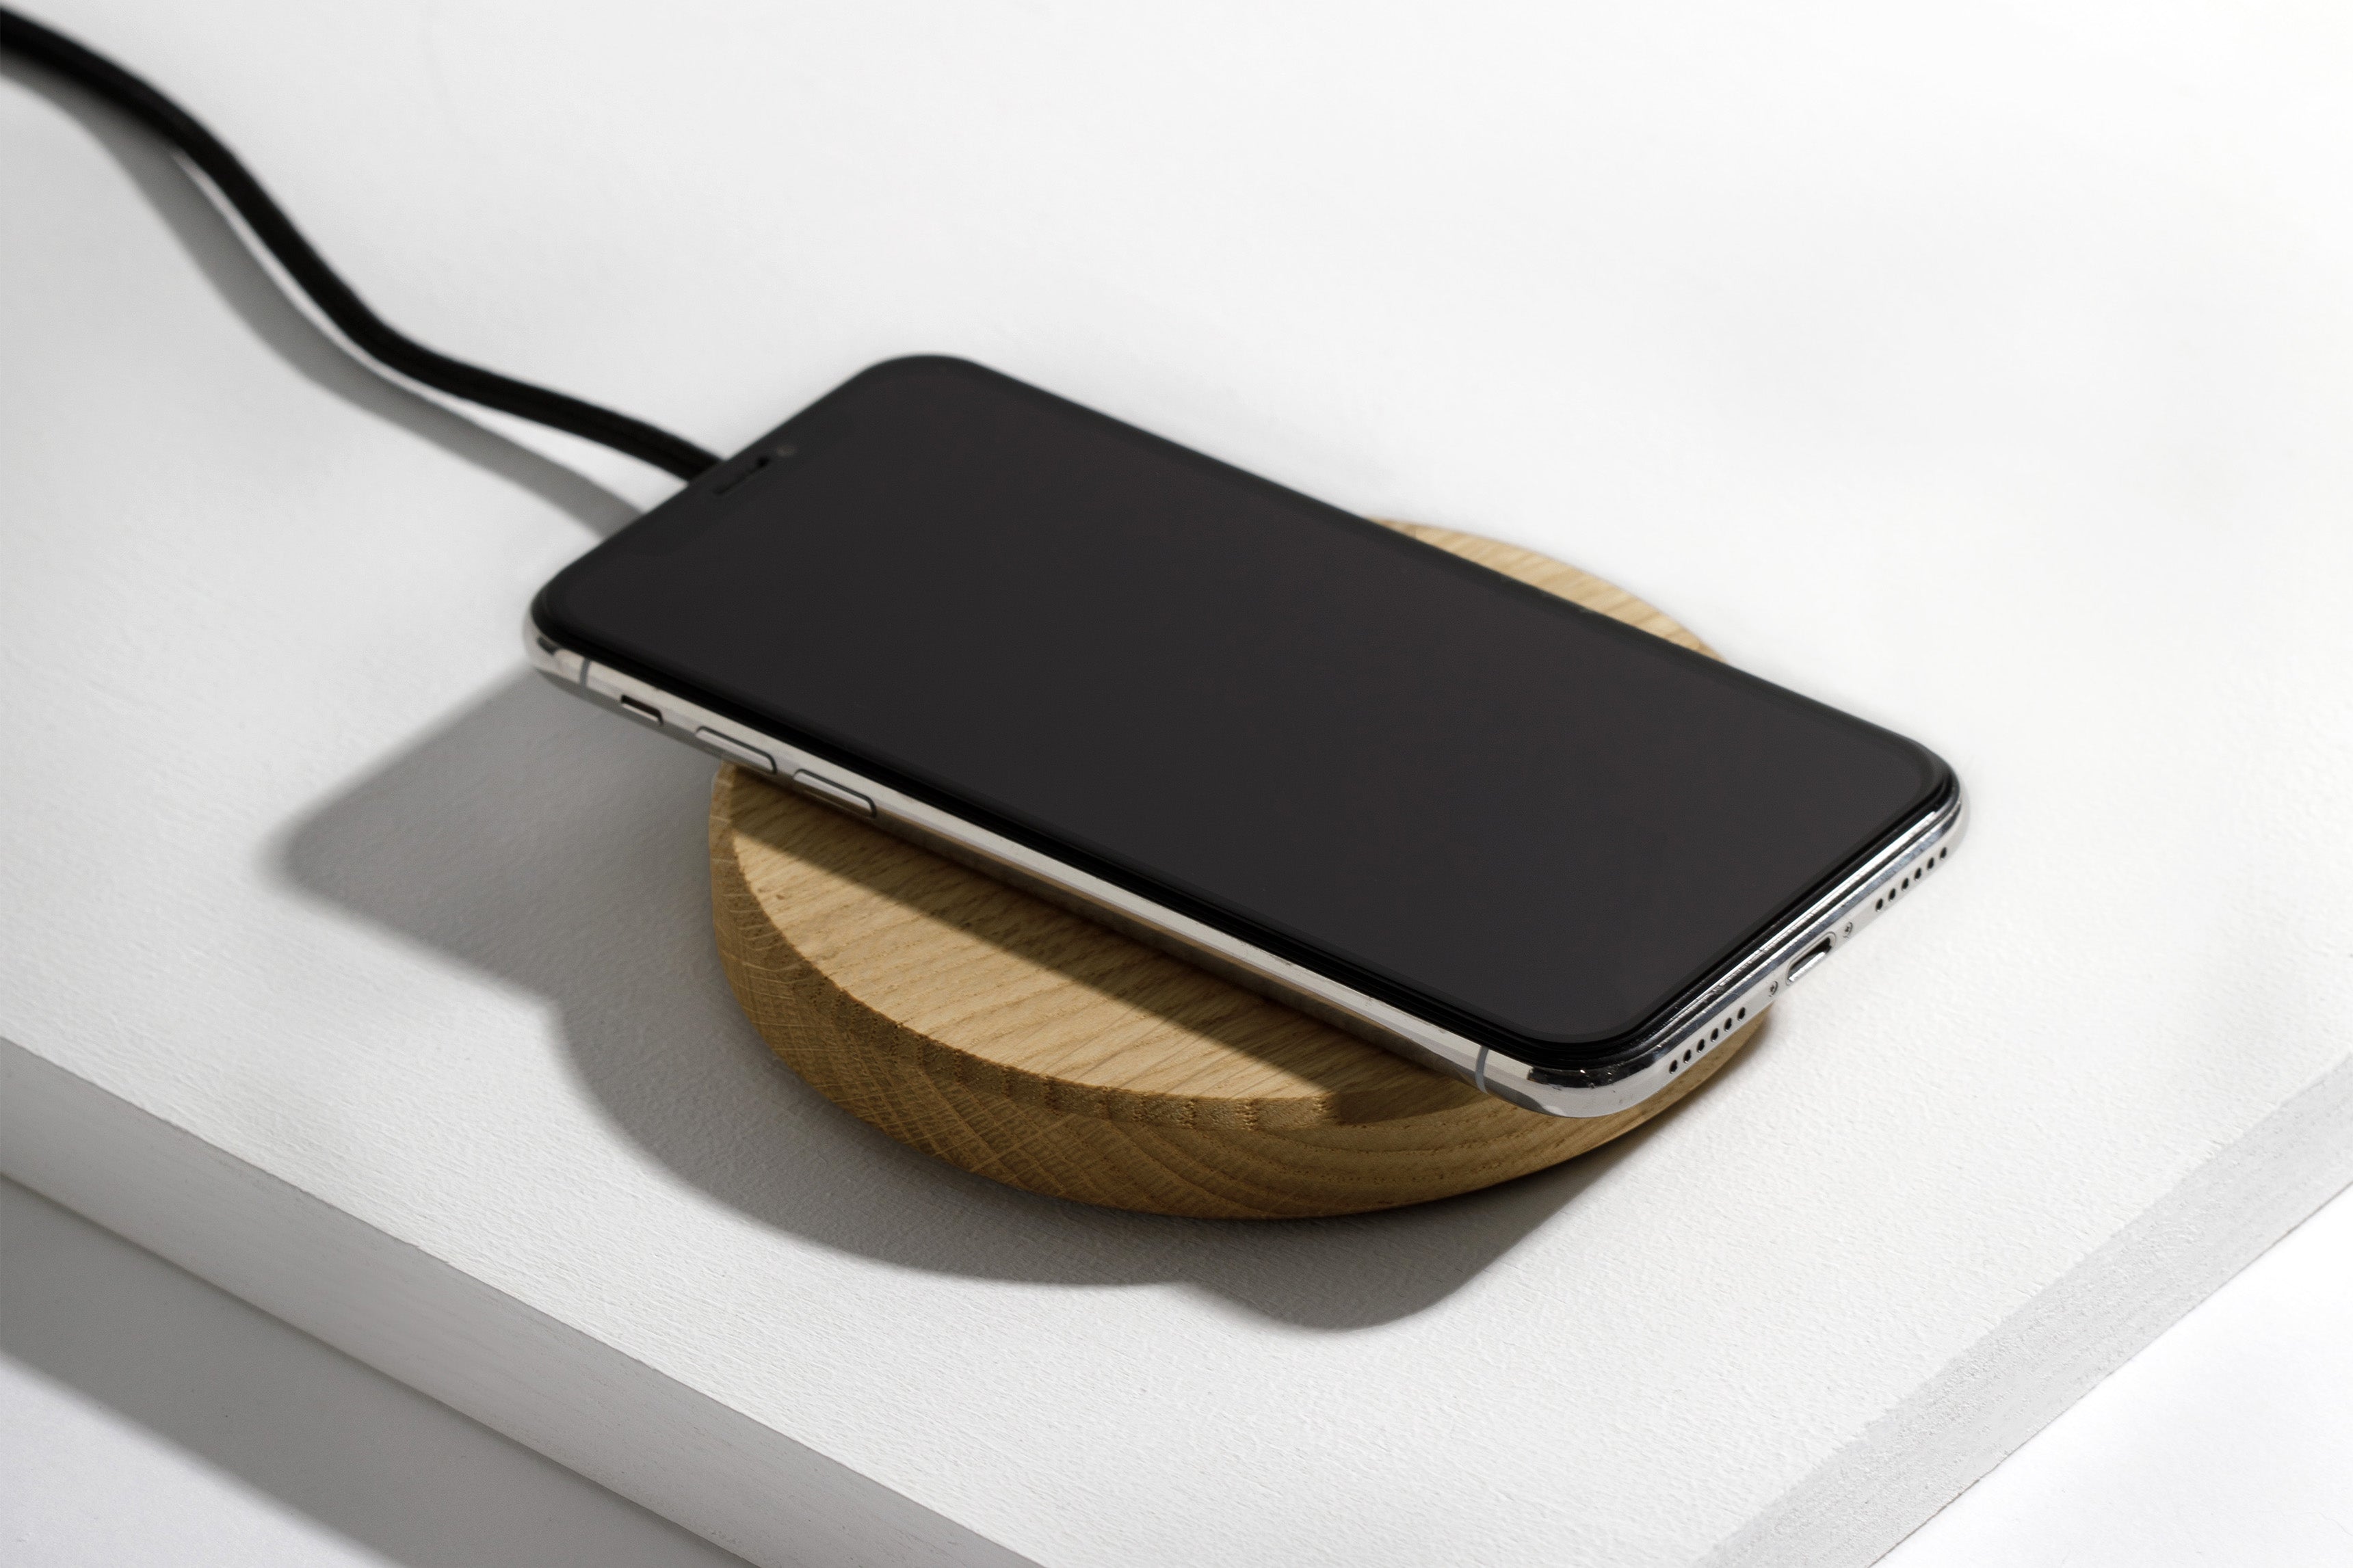 iPhone Accessories: Docks, Chargers, Stands